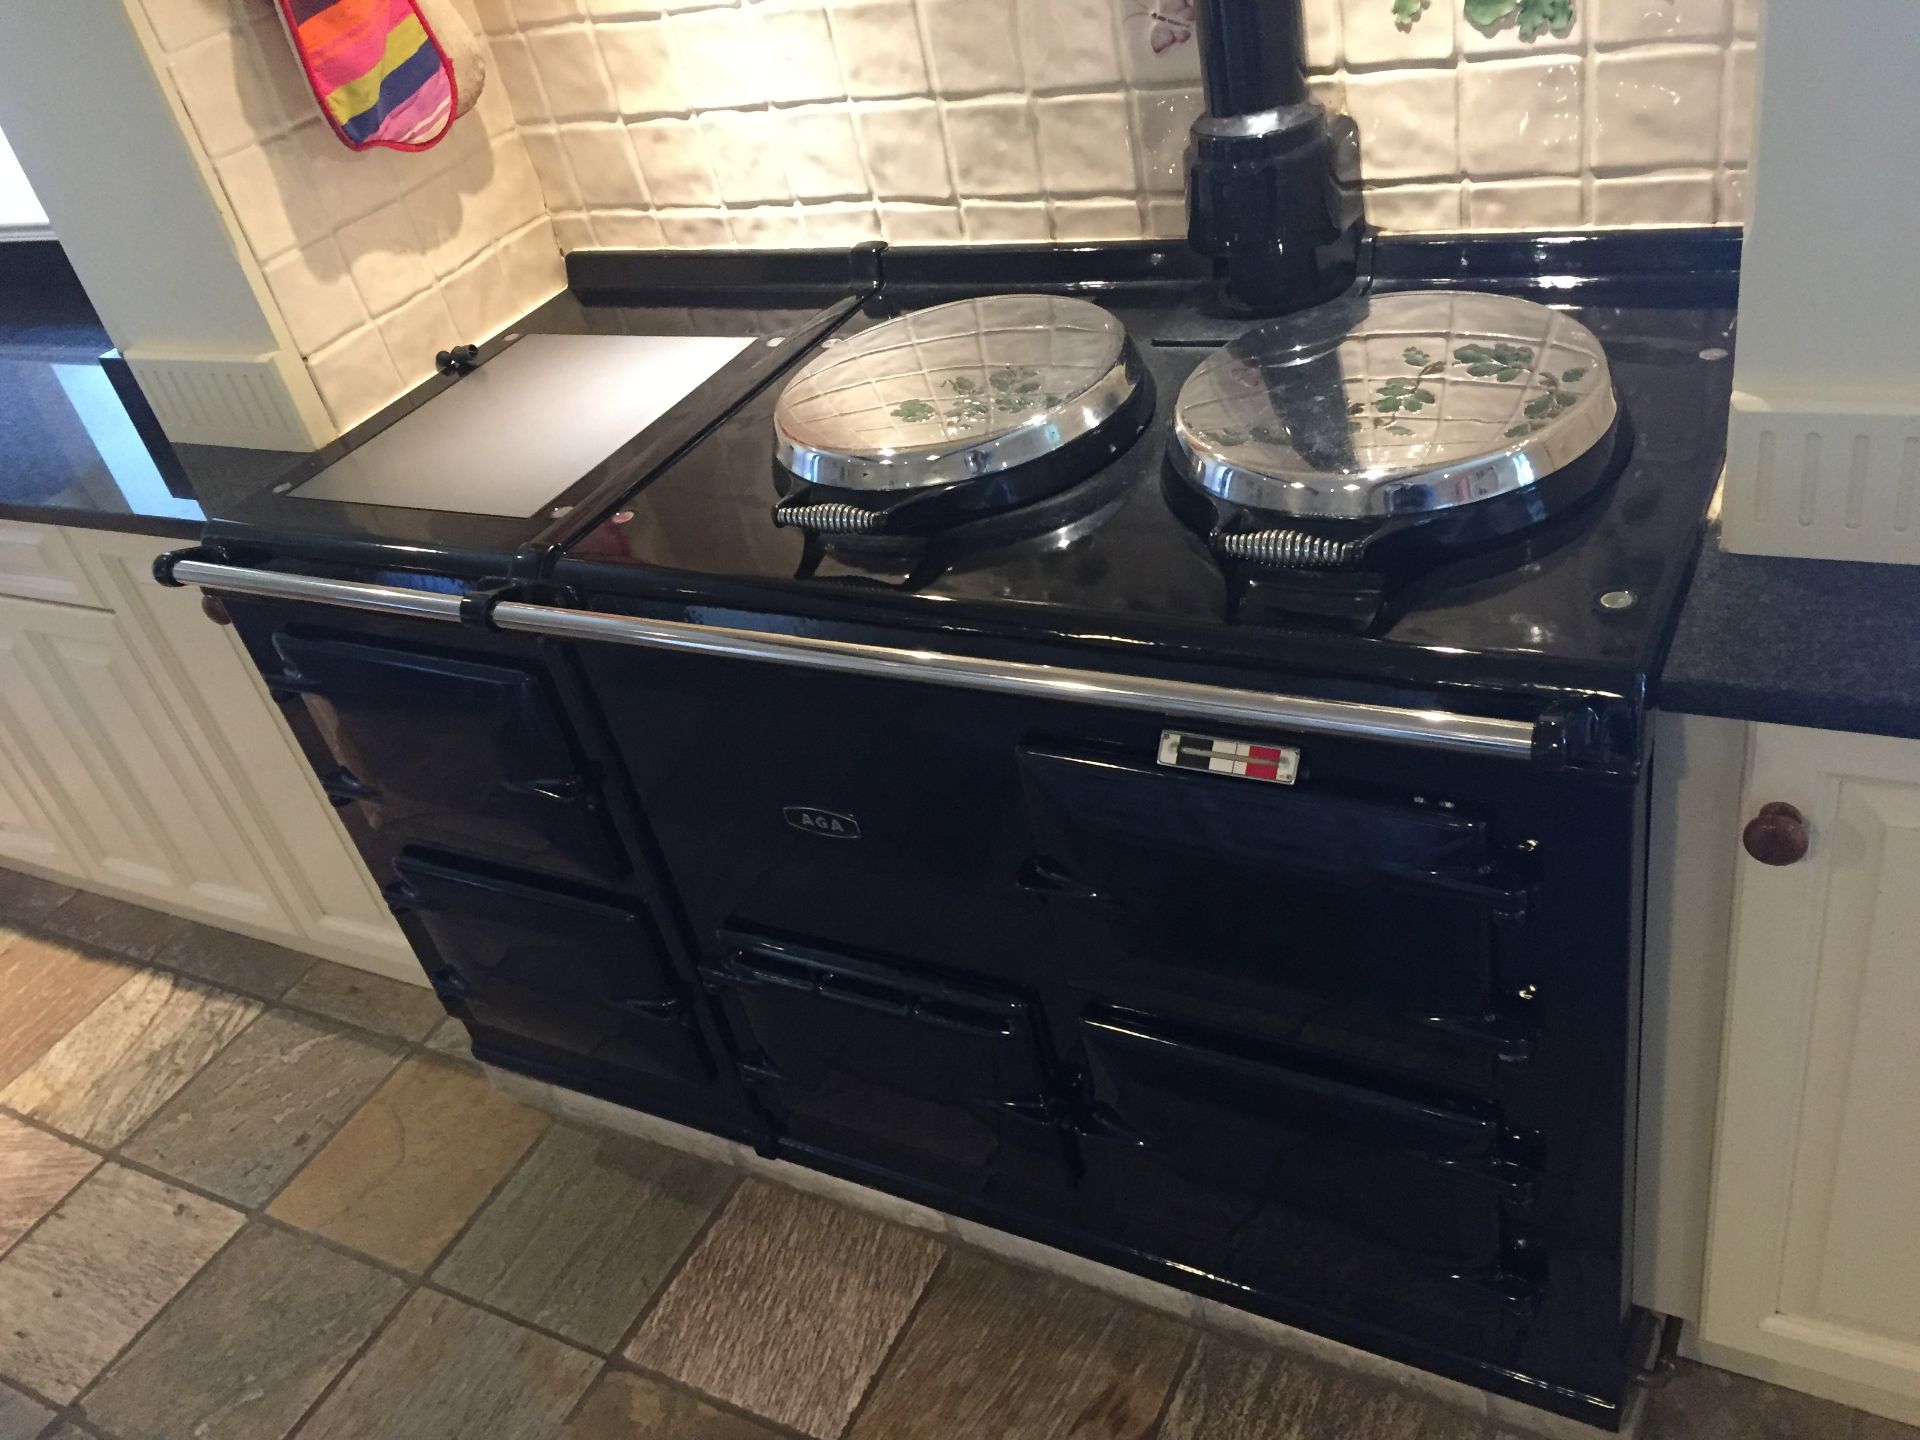 1 x Aga 4-Oven, 3-Plate Dual-Fuel Range Cooker - Cast Iron With Navy Enamel Finish With A Black Top - Image 10 of 21